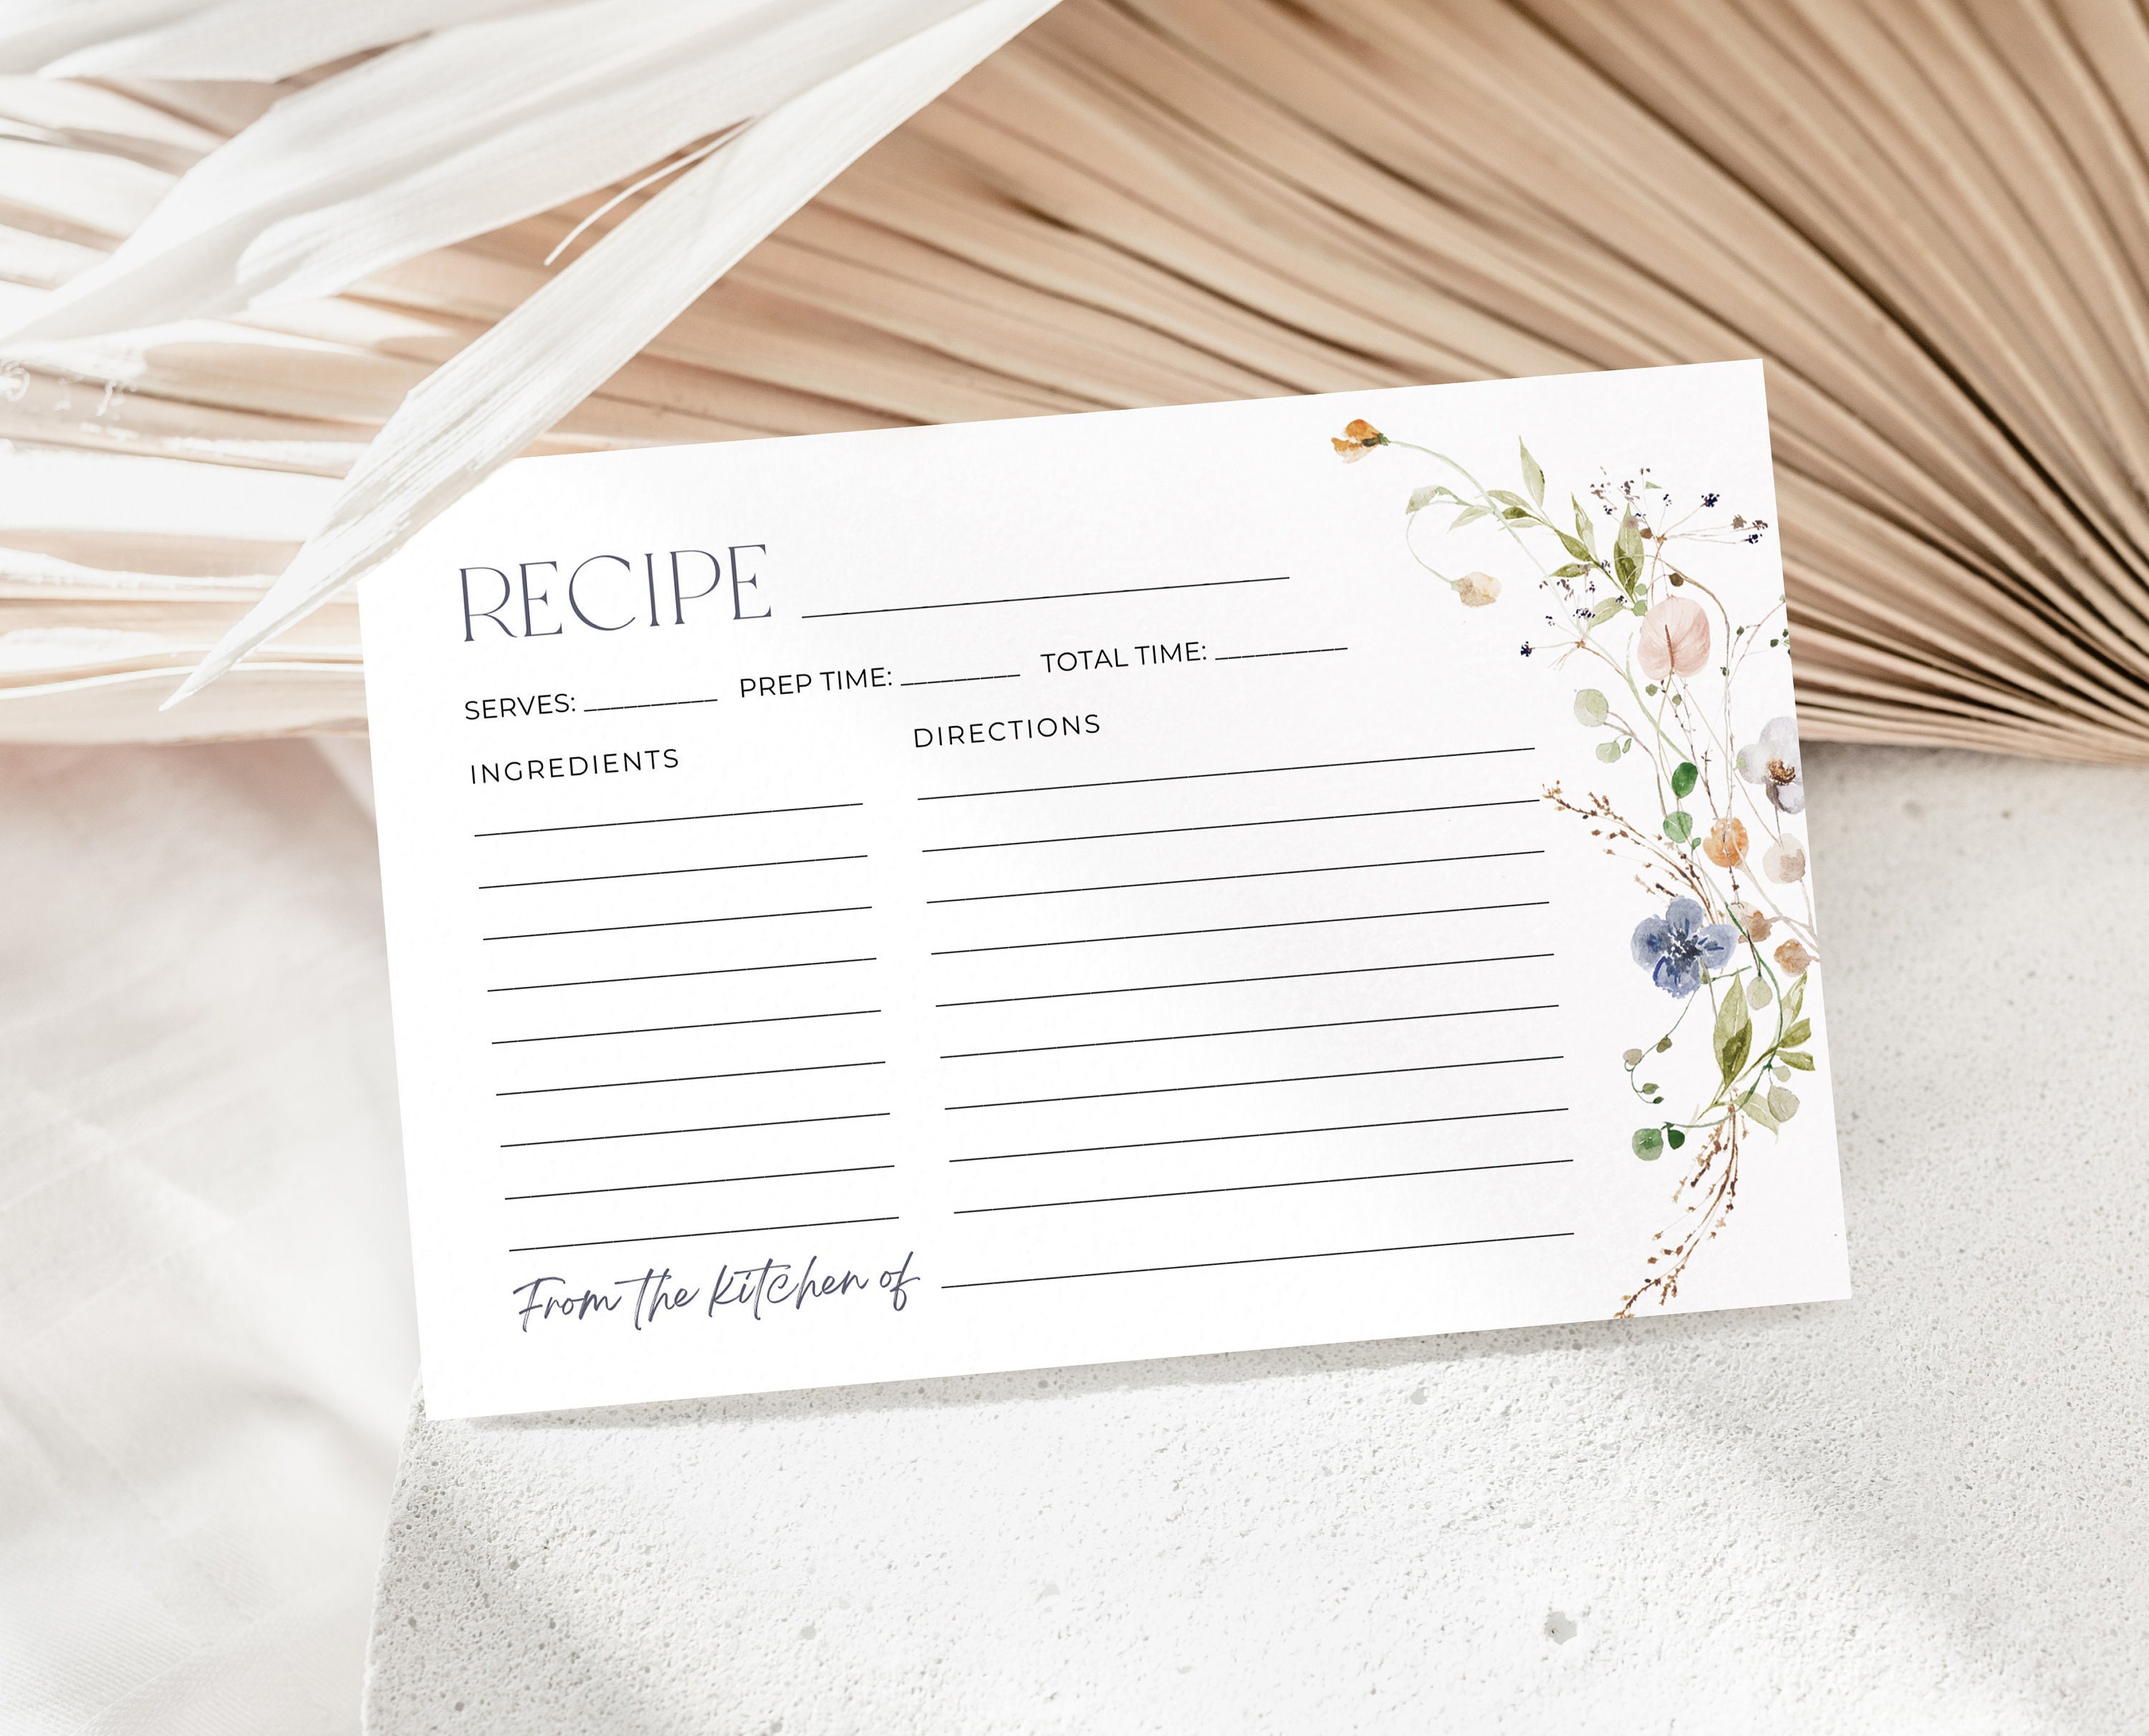 4x6 Printable Decorative Index Cards – Candid With a Side of Curls